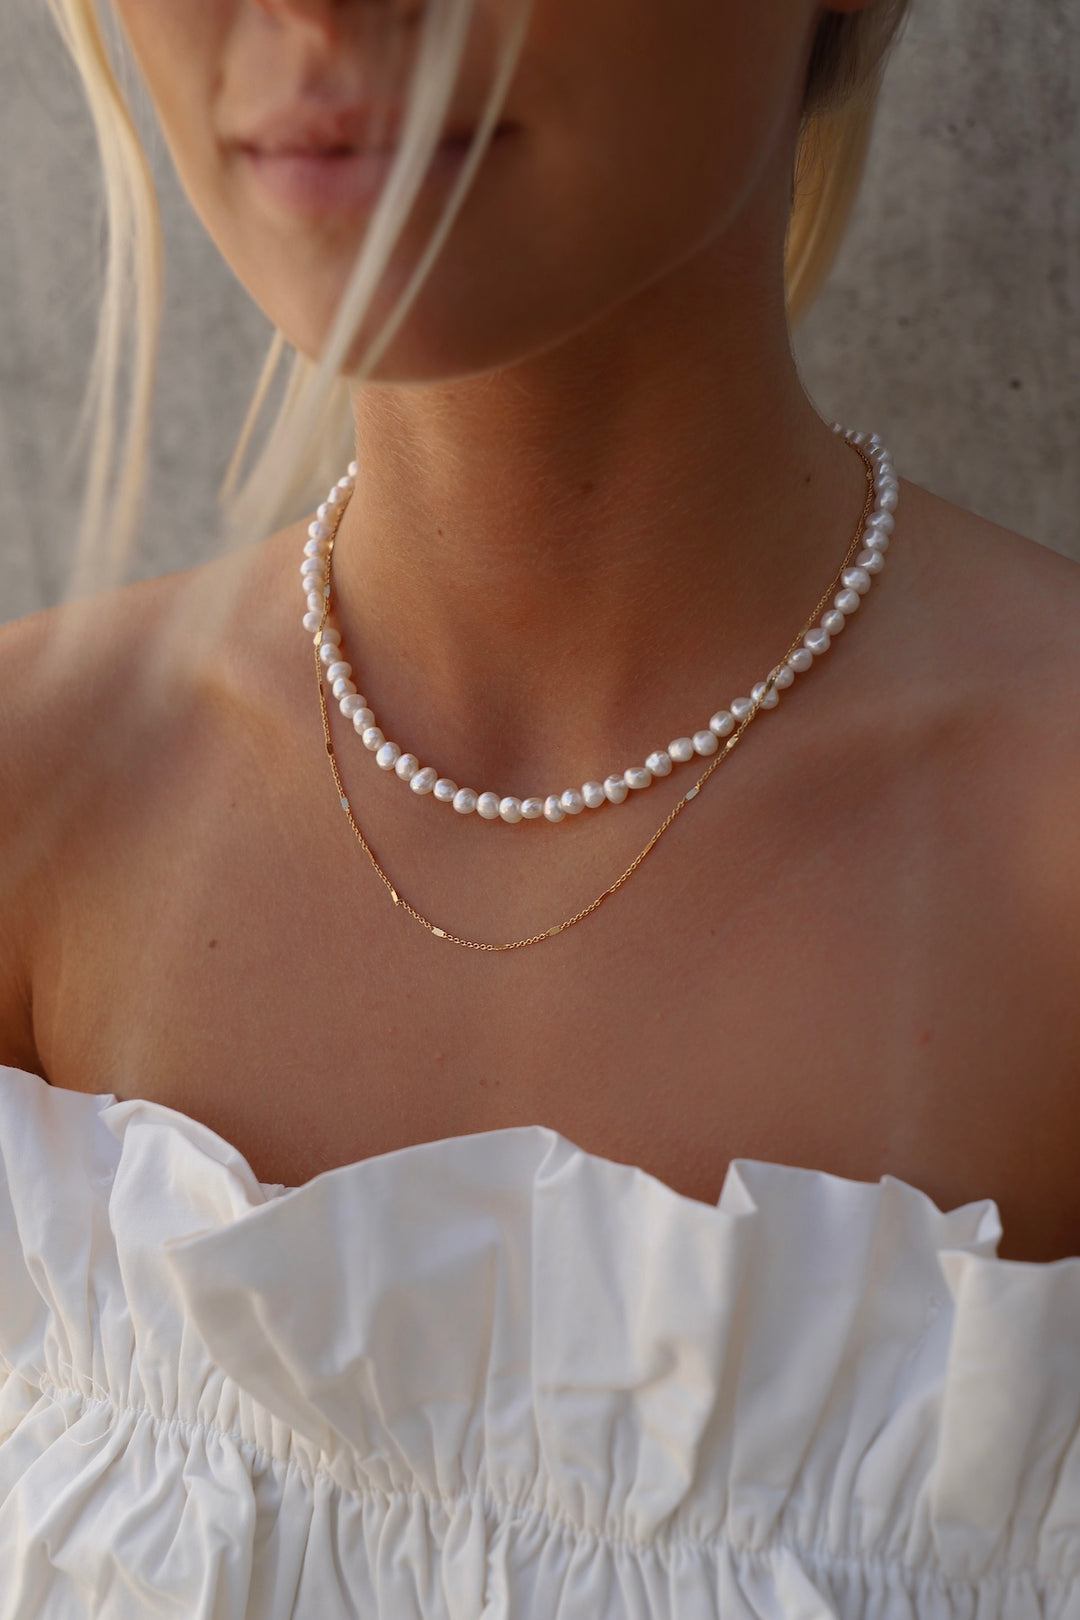 FRESHWATER PEARL NUGGET NECKLACE